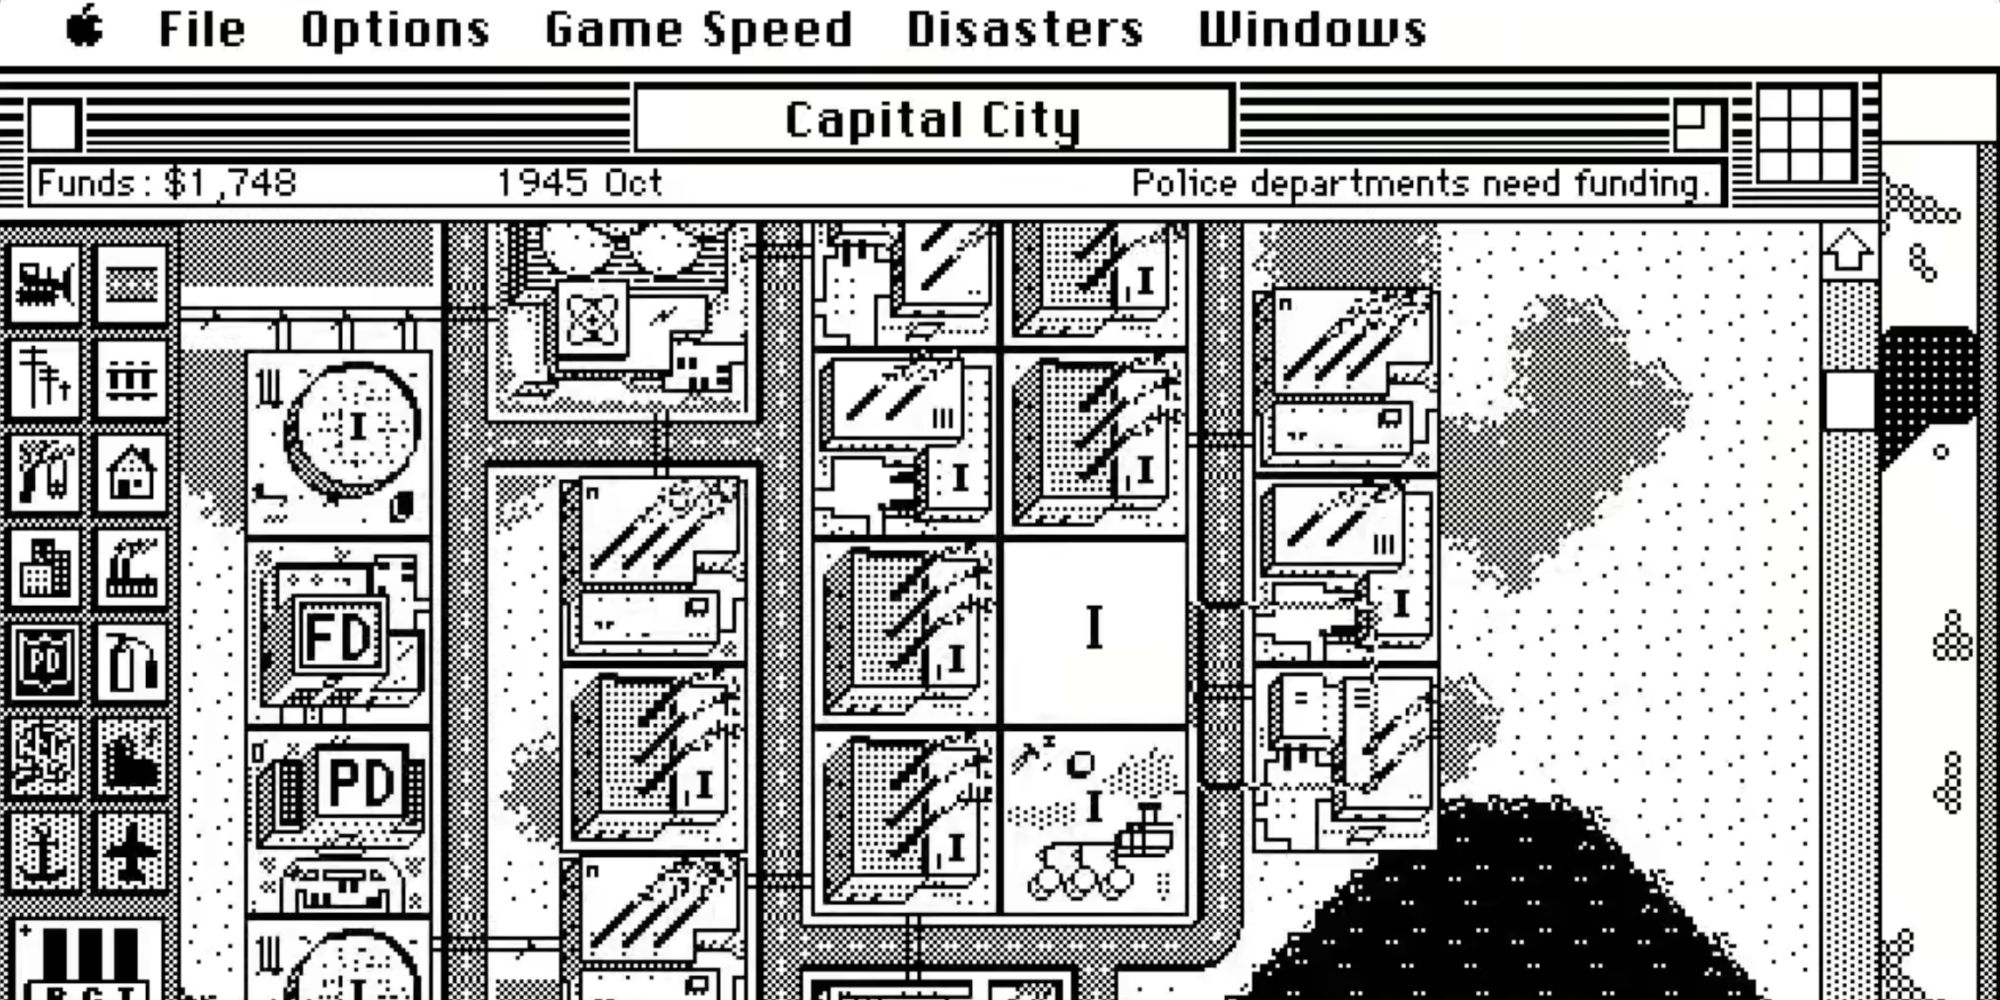 A screenshot from the original SimCity, running on a Mac, showing a black-and-white overview of the city's layout